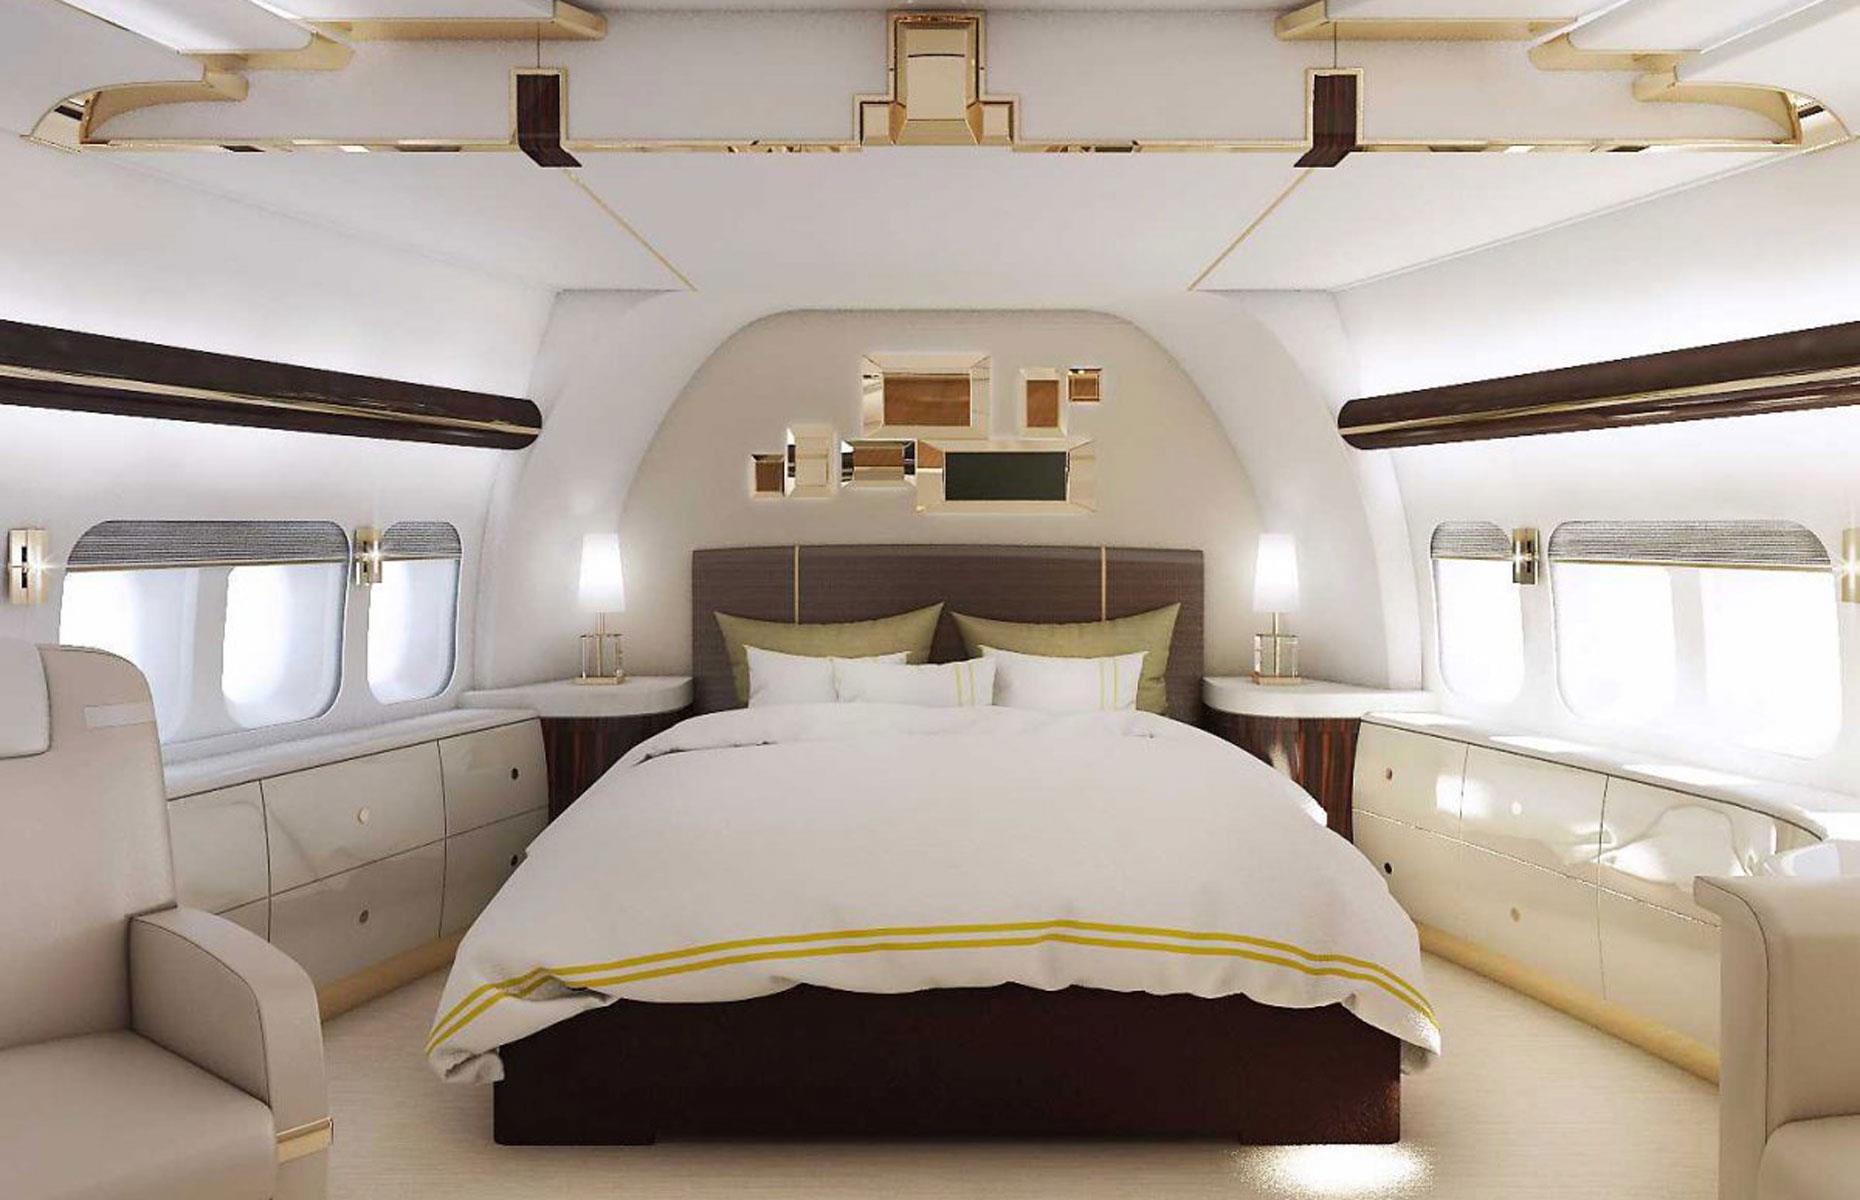 <p>The jet's interior aesthetic reportedly centers around an elegant palette of cream and gold.</p>  <p>The calming combination seems to be the color pairing of choice for the private jets of ultra-high net worth individuals, as demonstrated by the 747-8 master bedroom shown here. This luxurious space was designed and fitted by Greenpoint Technologies in 2016 for an anonymous buyer of a Boeing 747-8.</p>